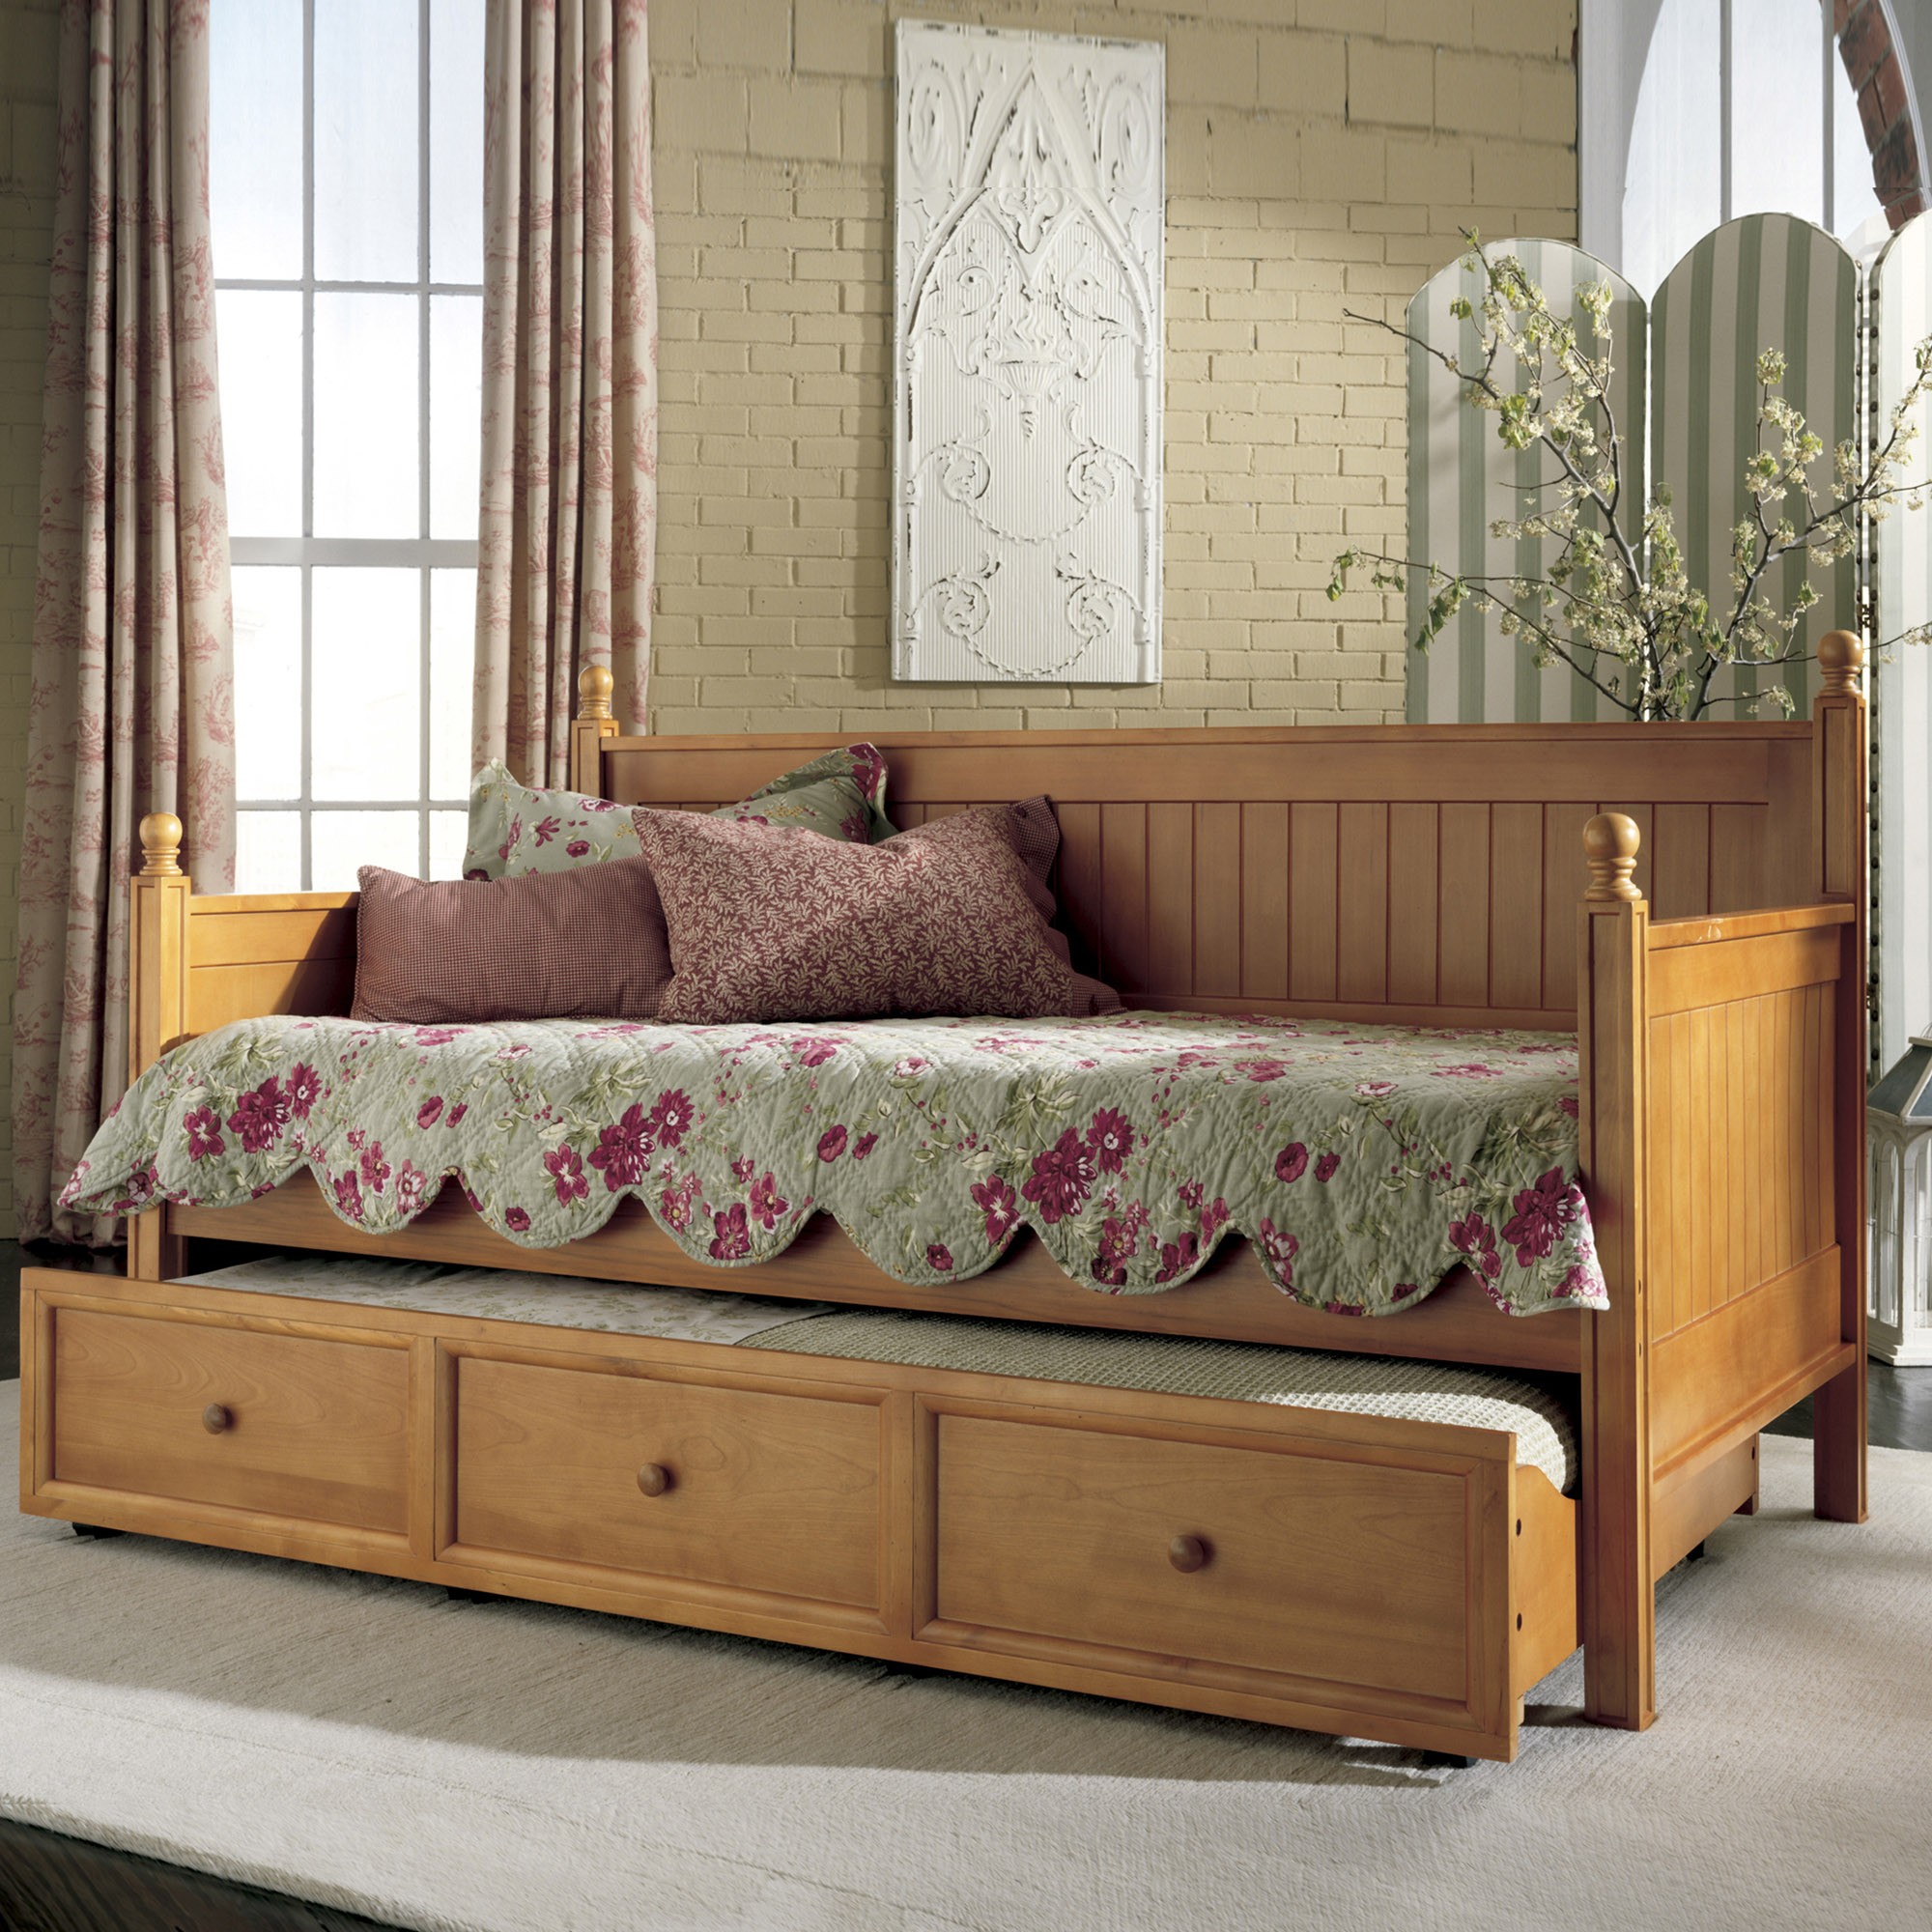 Wood daybeds with pop up trundle design